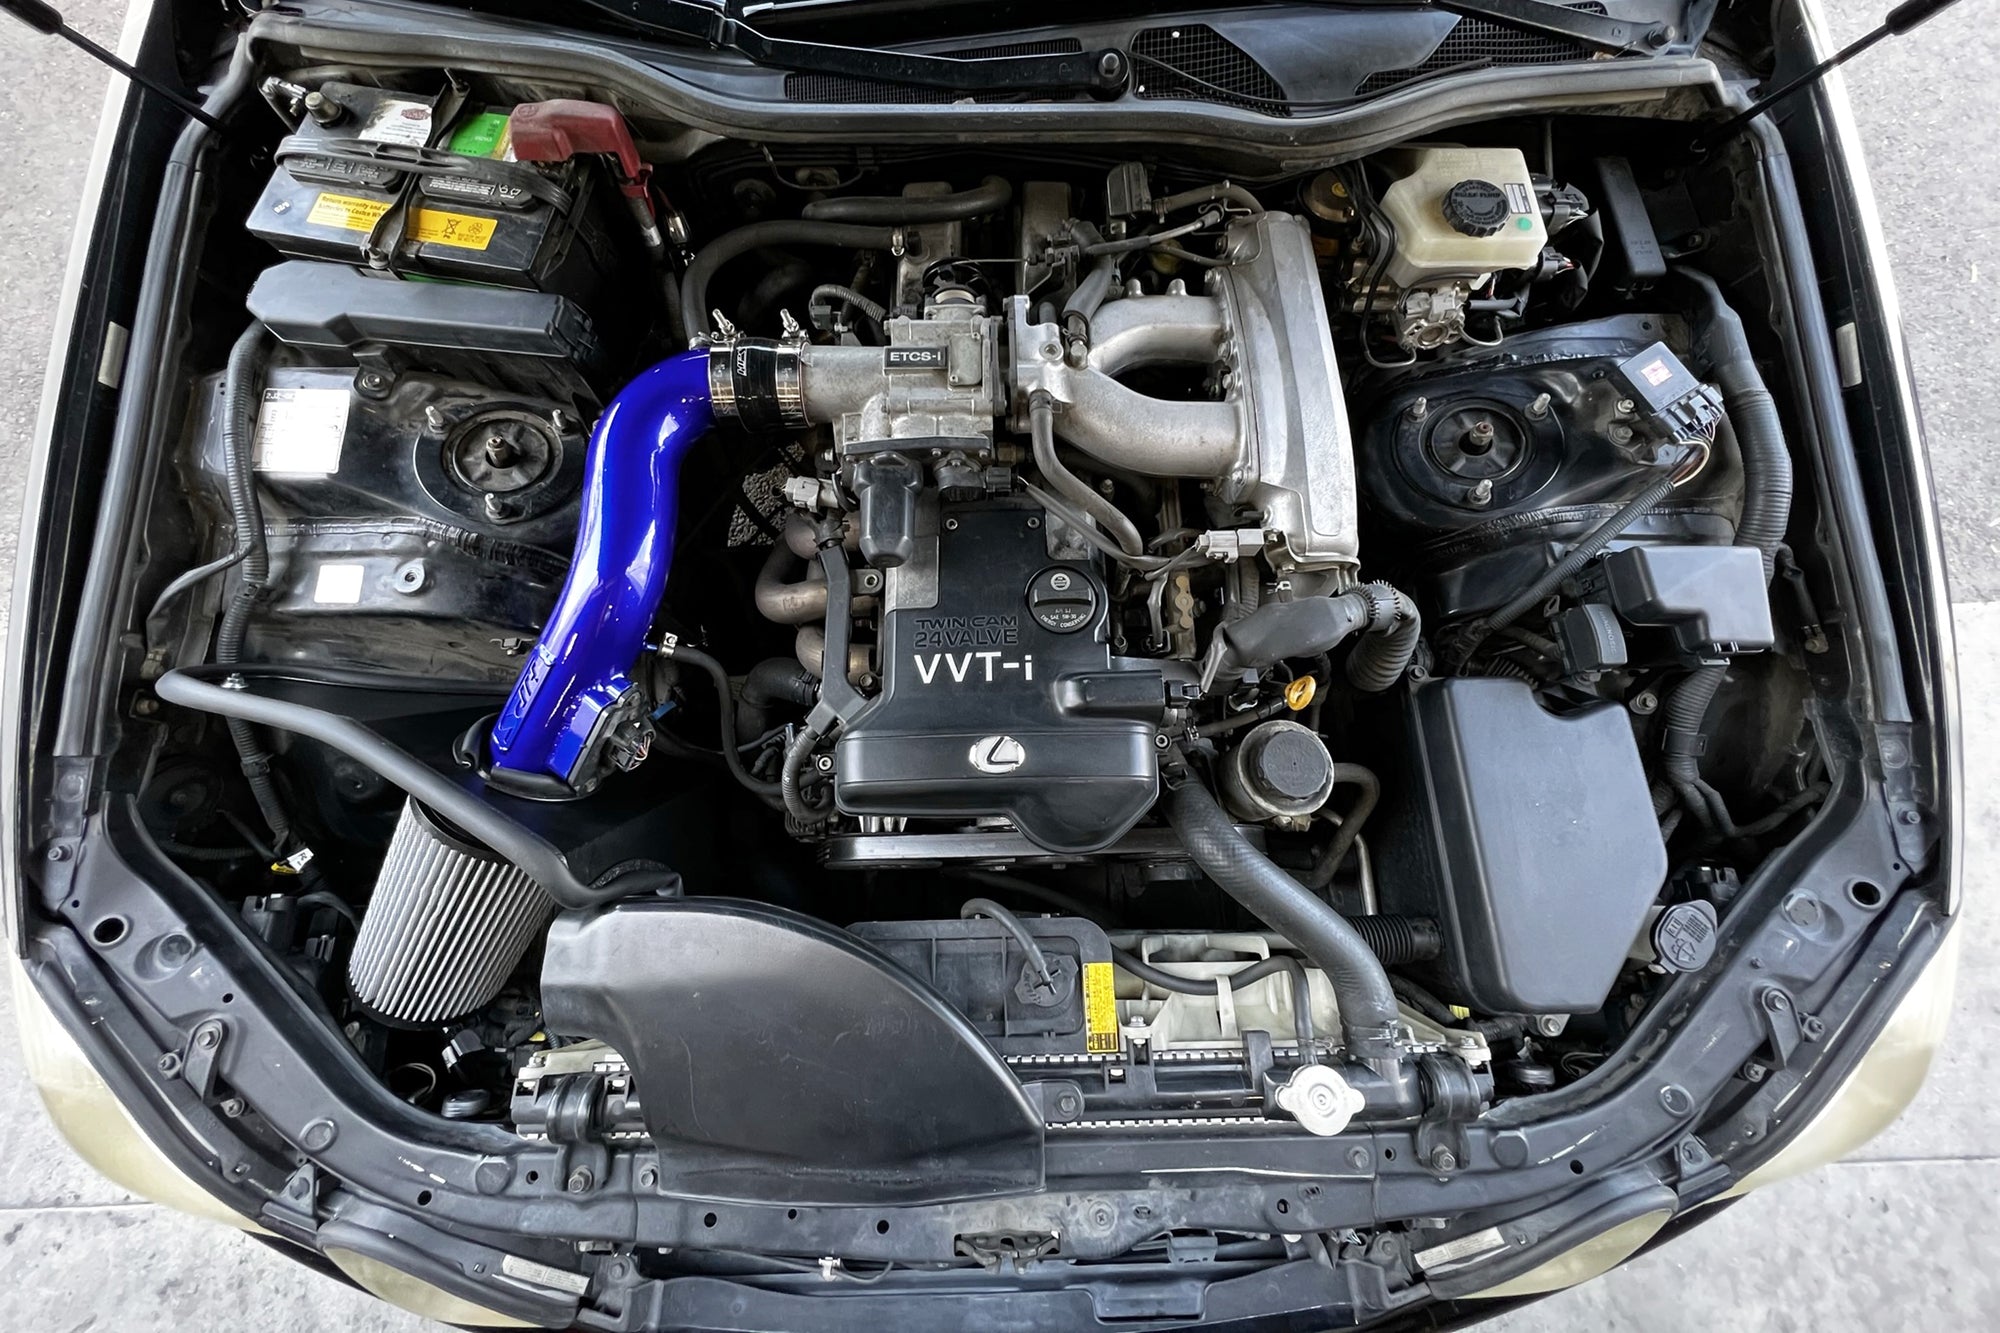 HPS Cold Air Intake Kit with Heat Shield Installed 98-00 Lexus GS300 3.0L 2JZGE 827-705